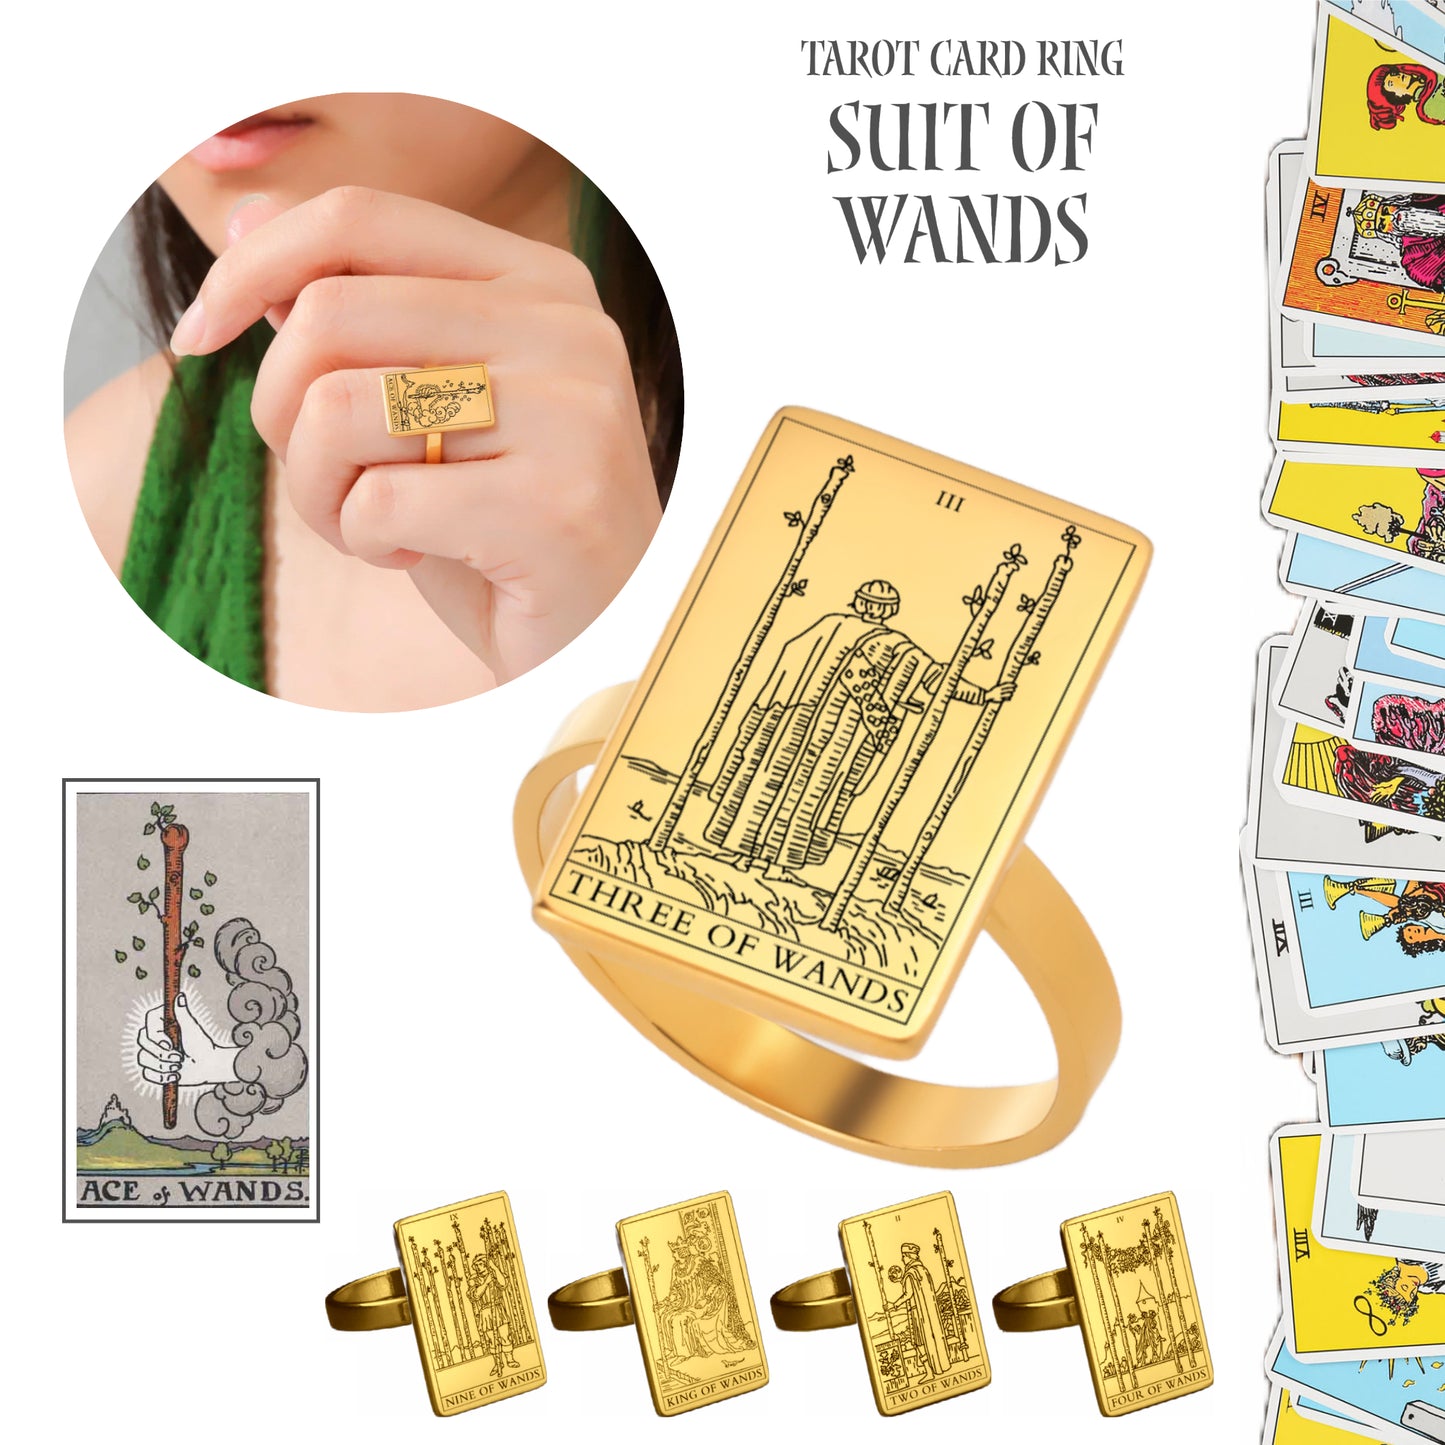 Tarot Card Ring | Suit Of Wands Minor Arcana Tarot Cards | Gold-Plated Stainless Steel Charm Jewelry